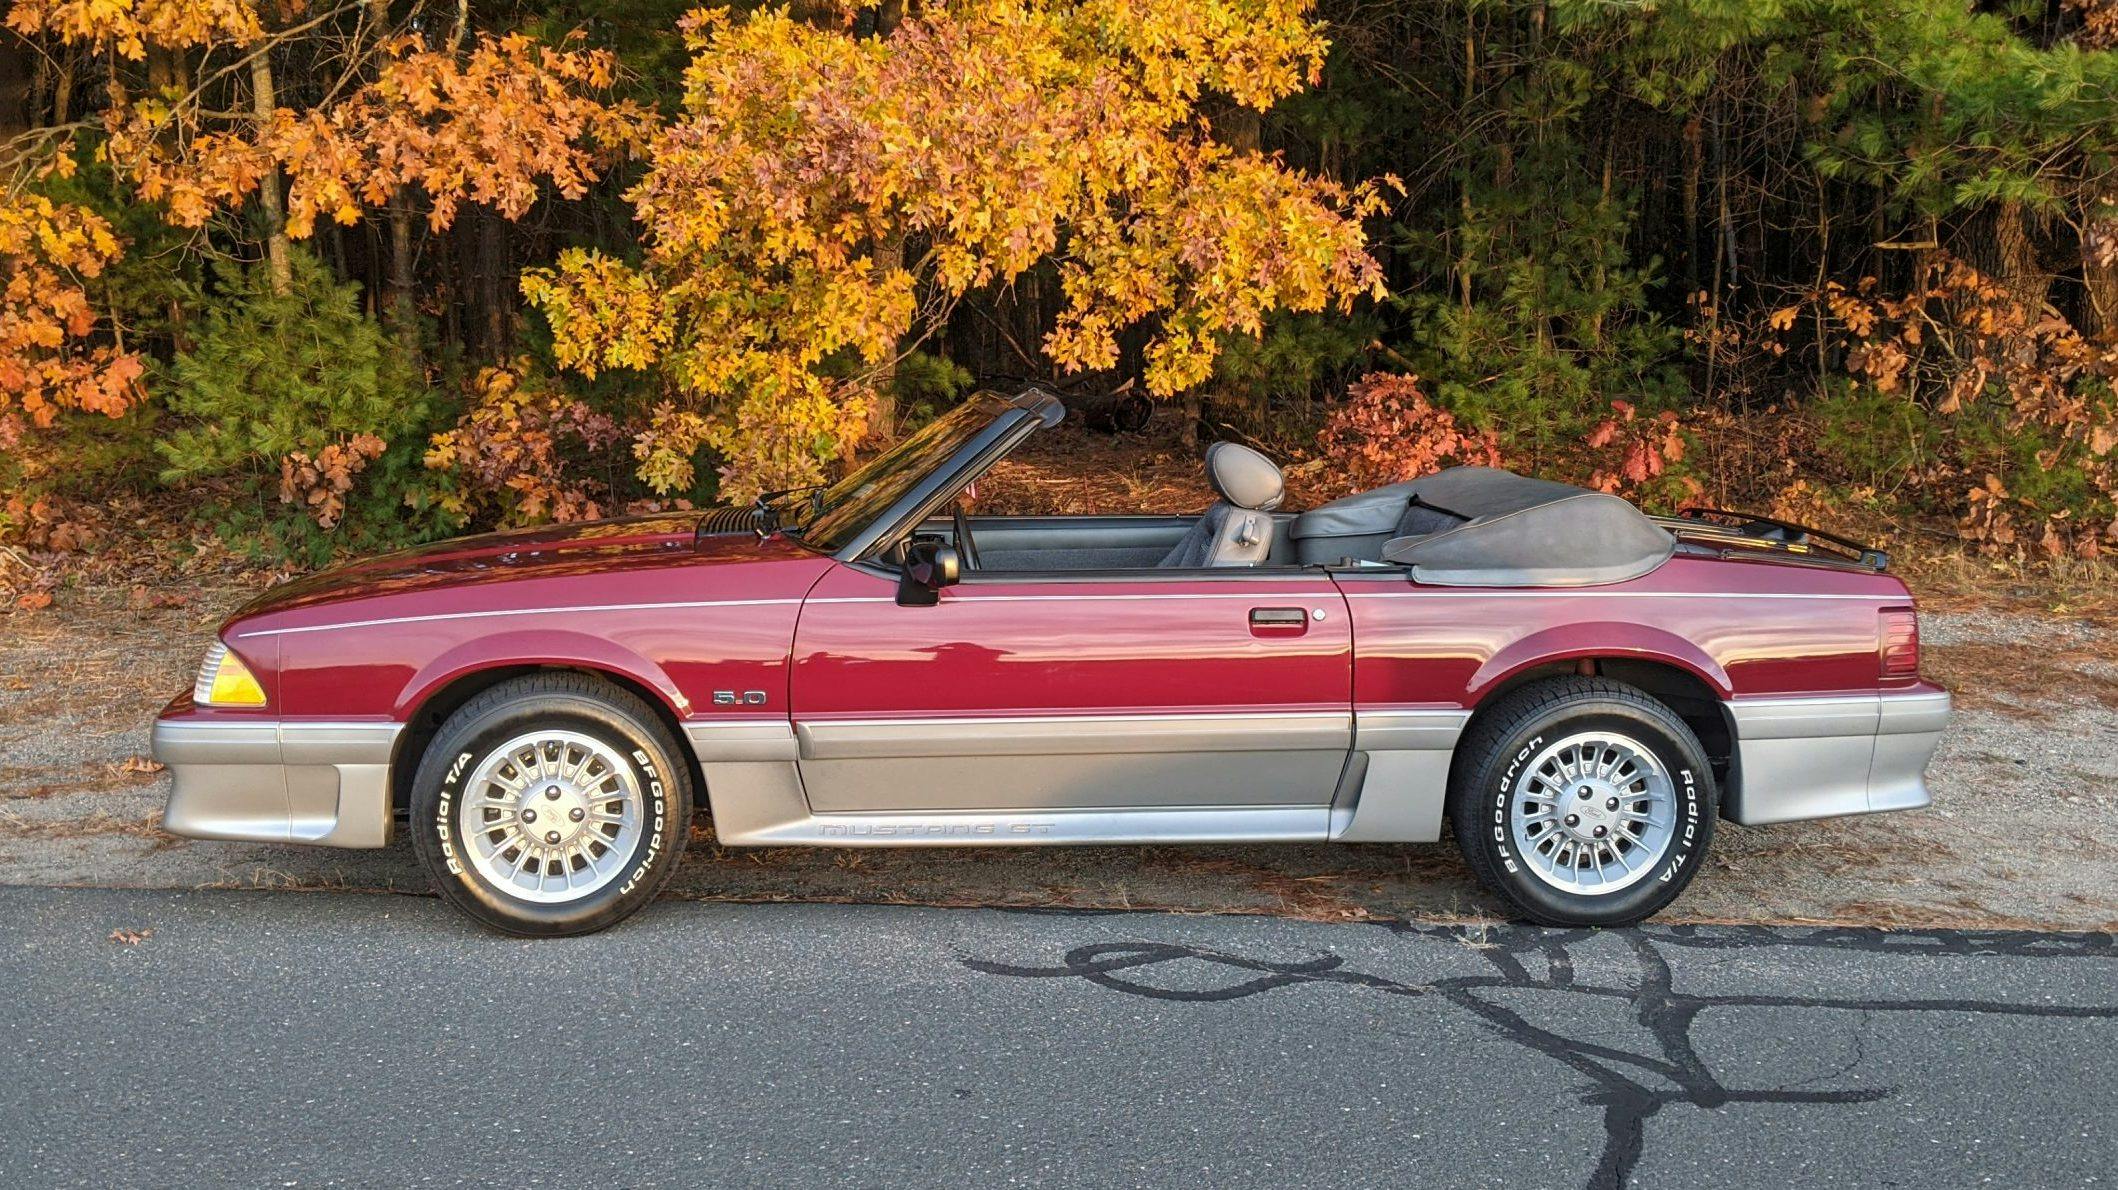 1989 Ford Mustang side view